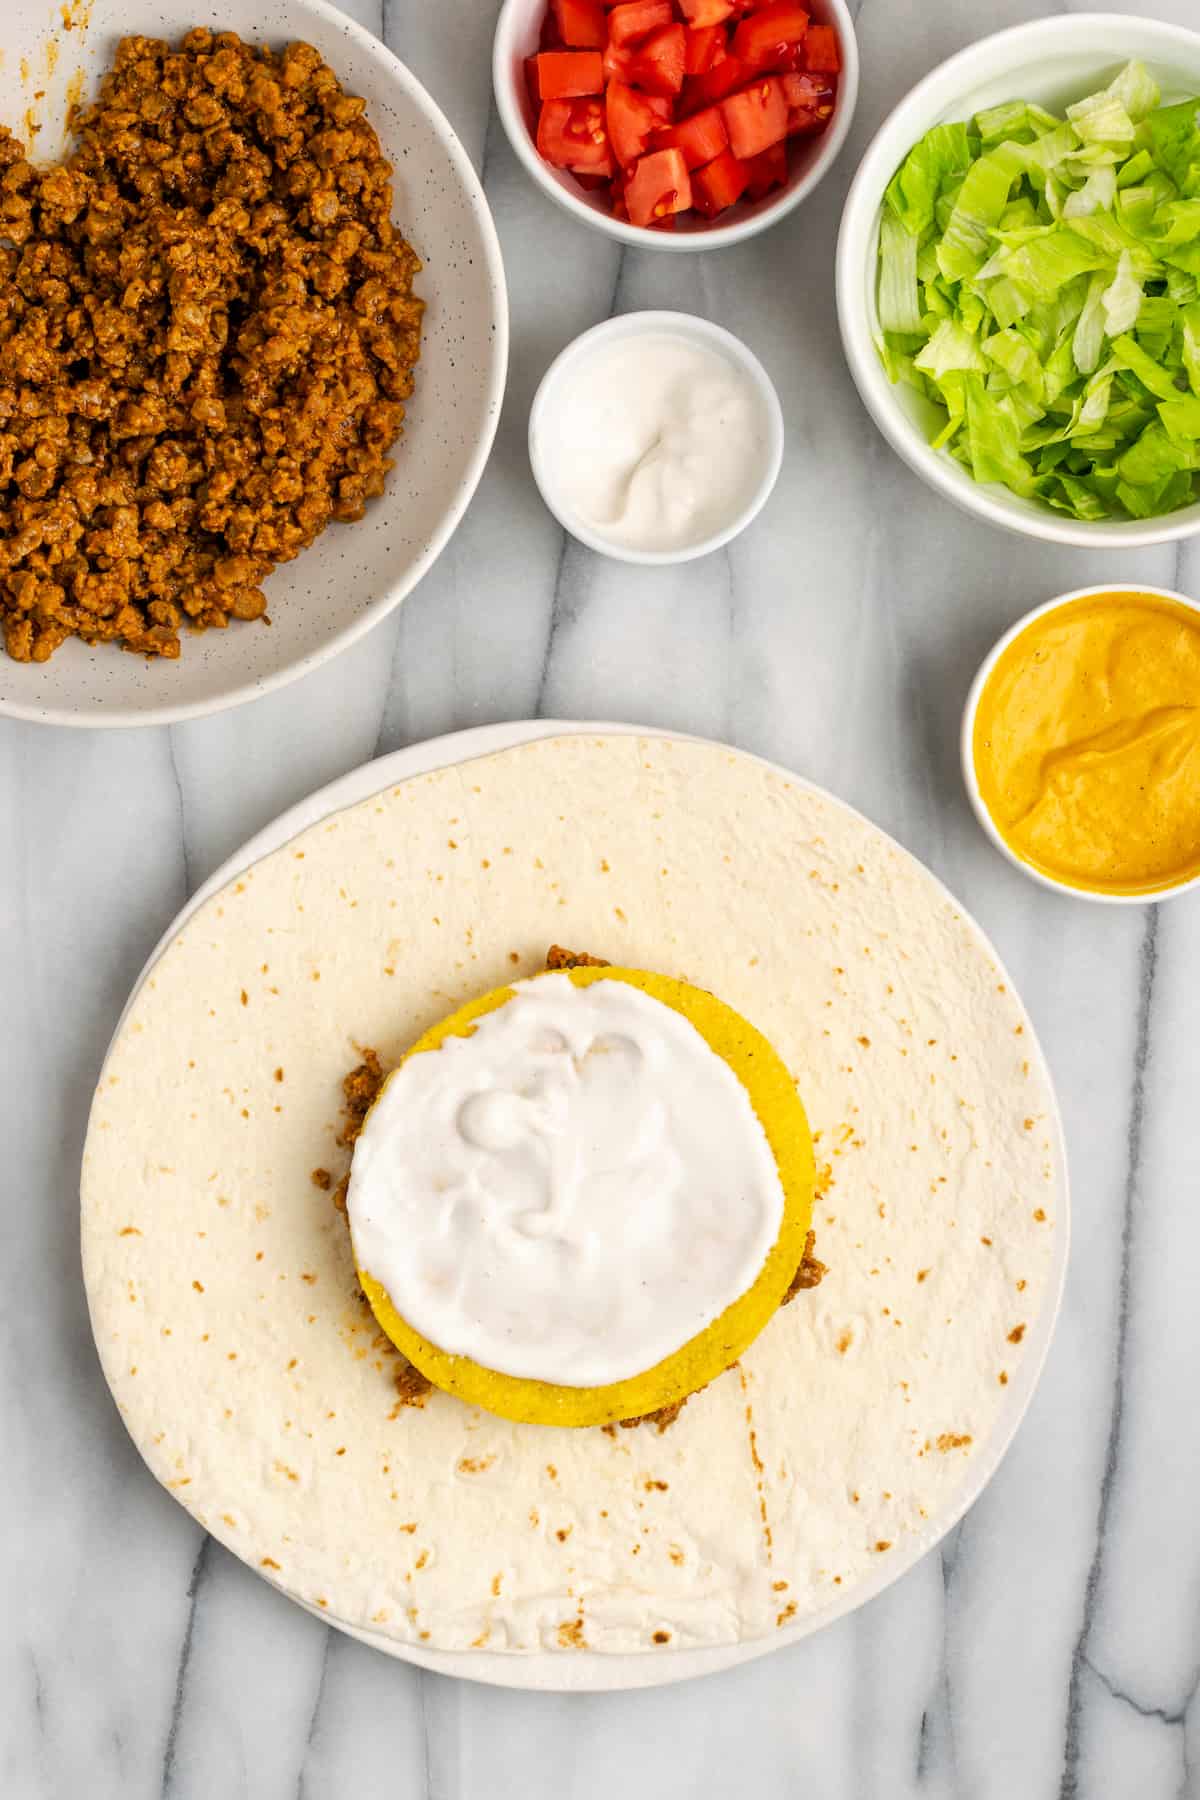 A flour tortilla topped with vegan meat crumbles, vegan cheese sauce, a tostada, and vegan sour cream, next to bowls of meat crumbles, cheese sauce, sour cream, lettuce, and tomatoes